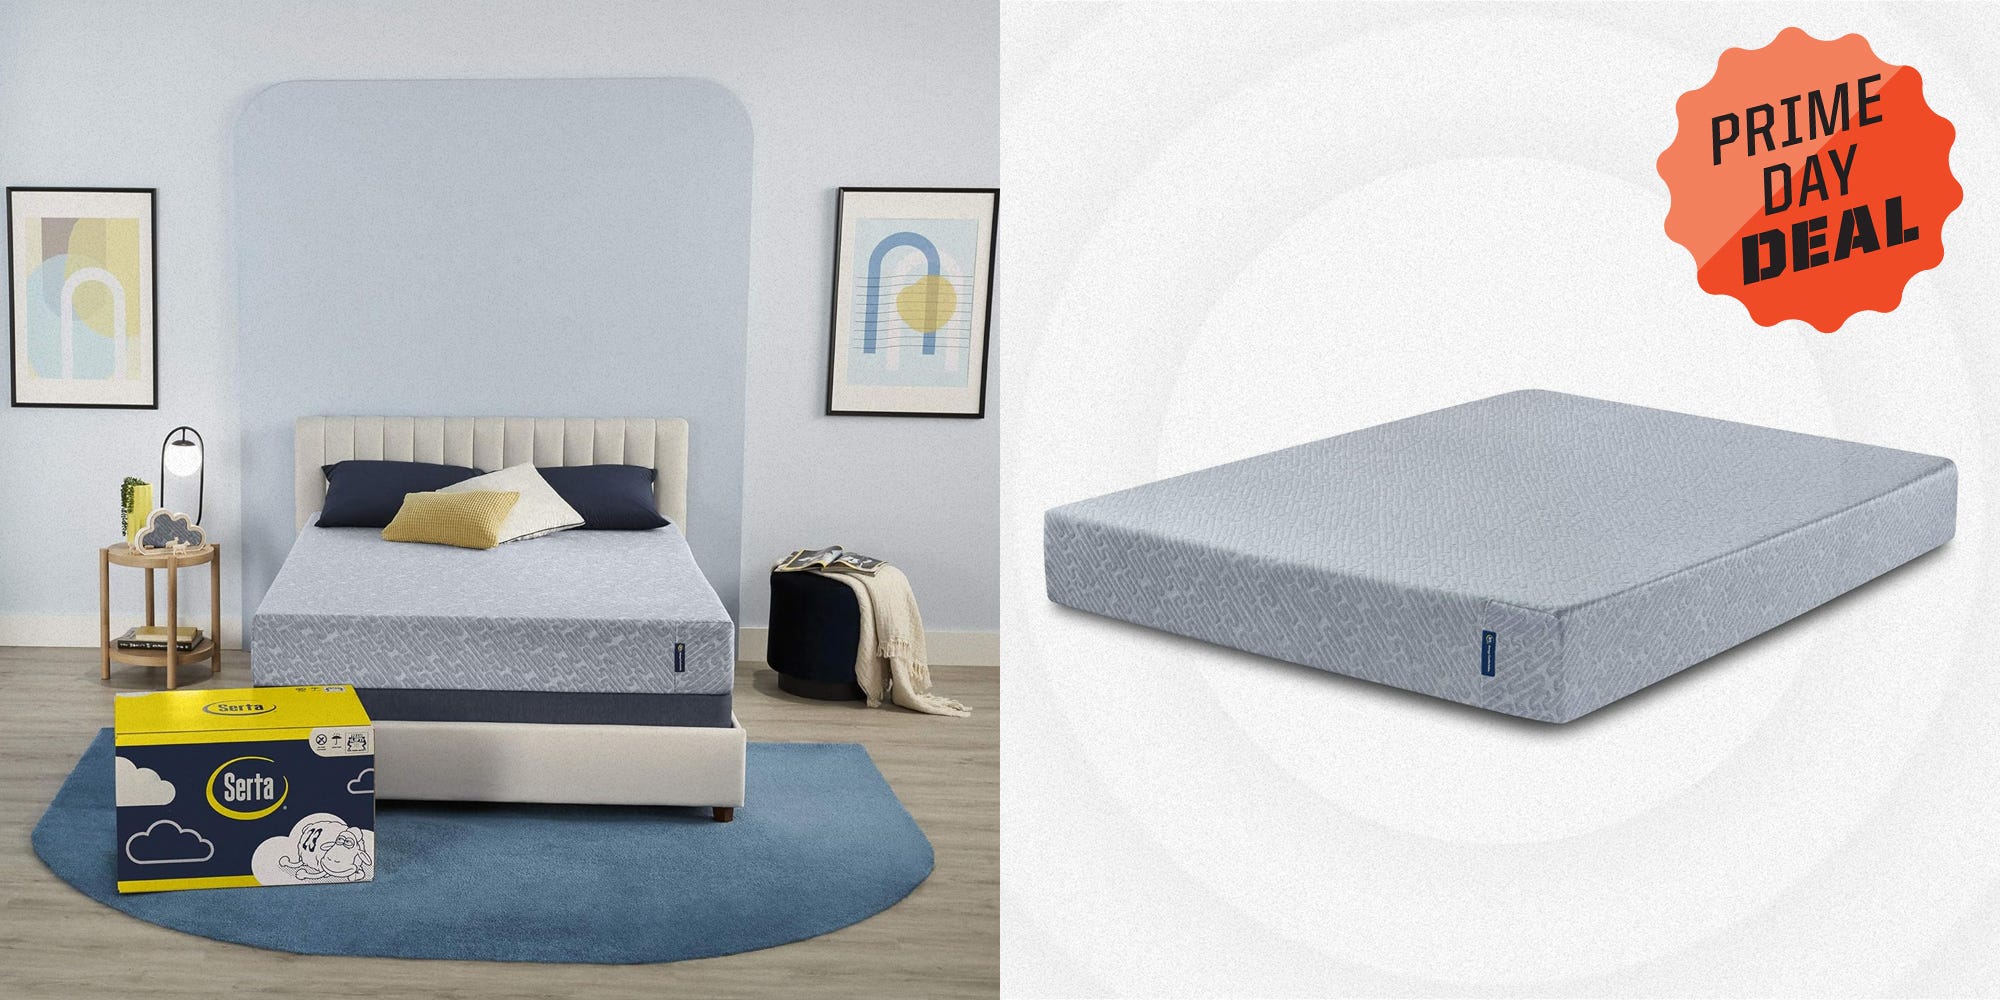 These Are the Best Amazon Prime Big Deal Days Mattress Discounts You Can Score Ahead of Time